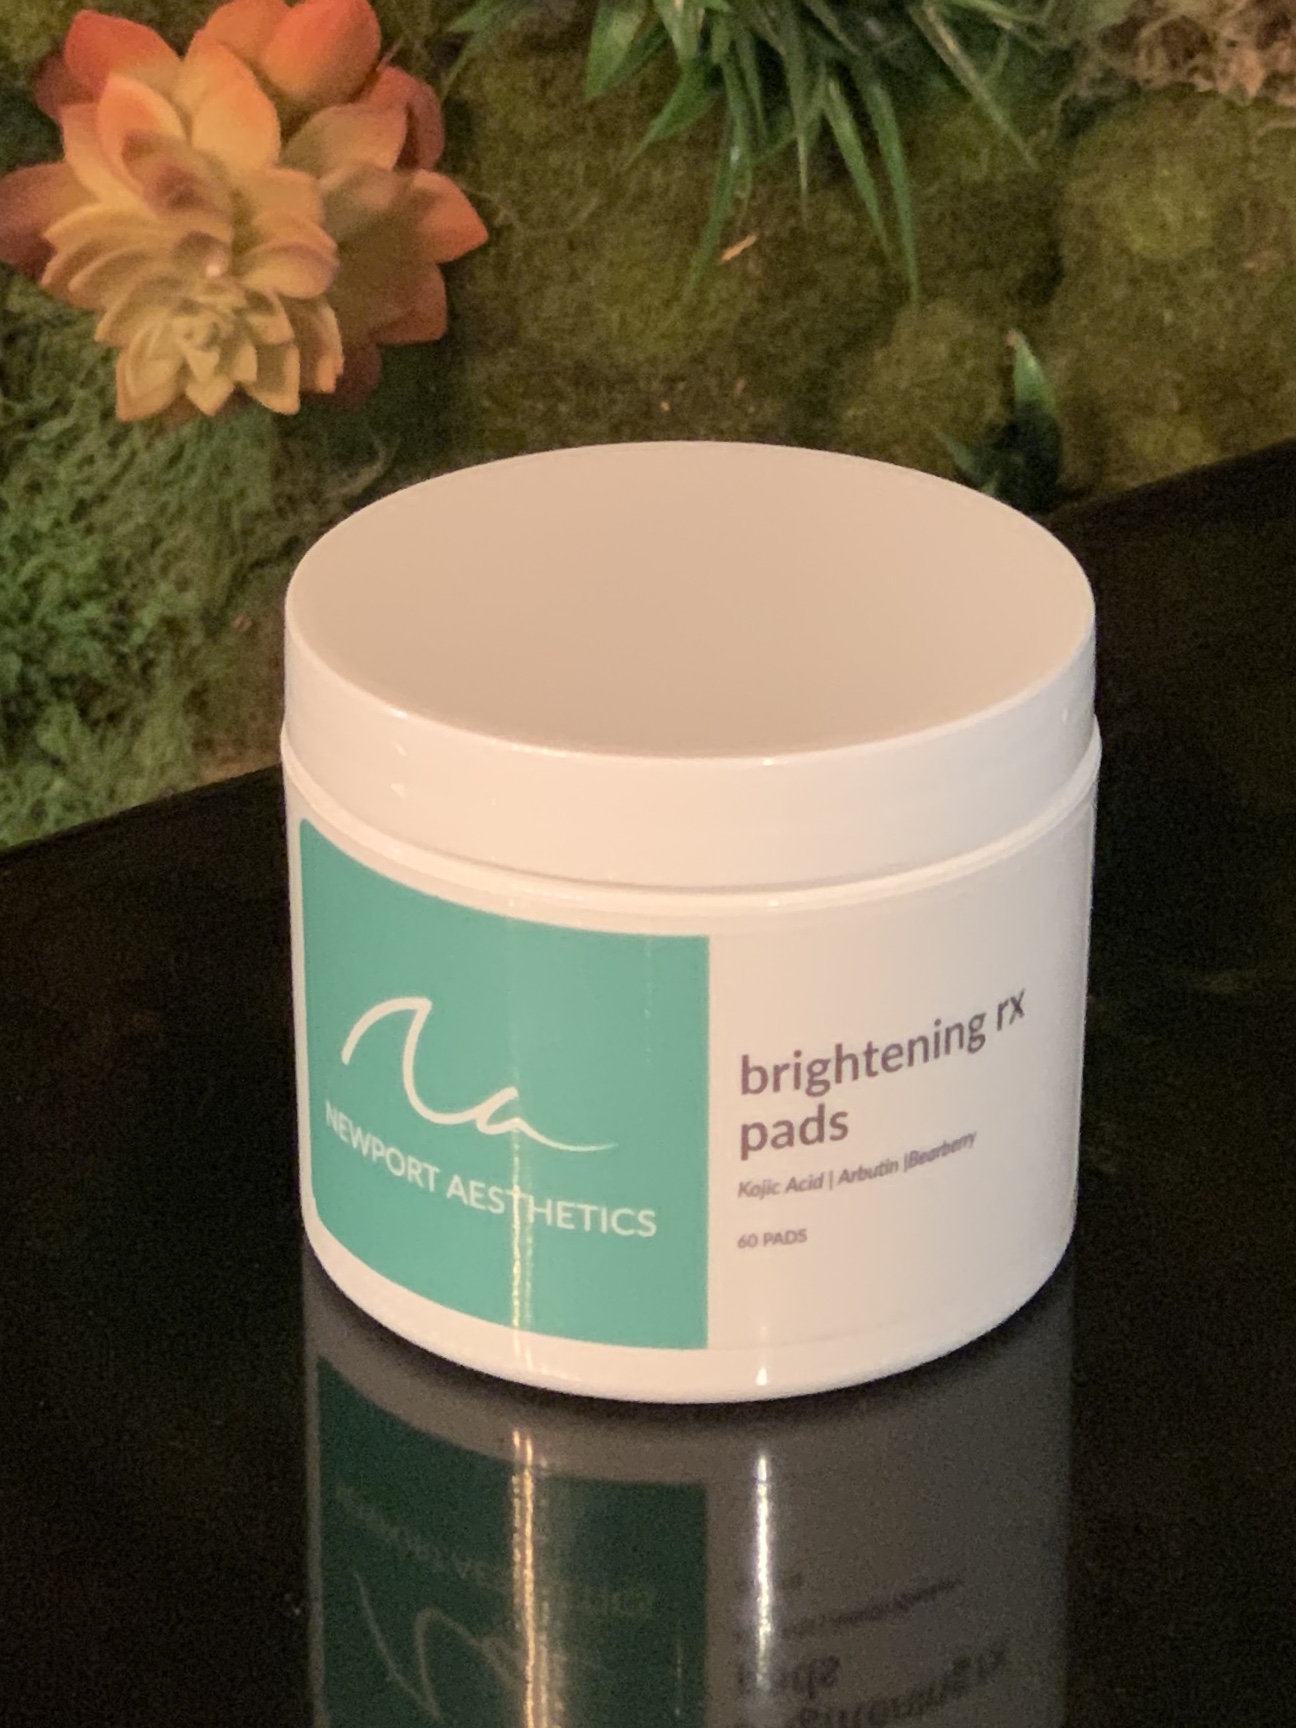 Newport Aesthetics brightening rx pads Skin Care Products by Dr Ann Mai MD